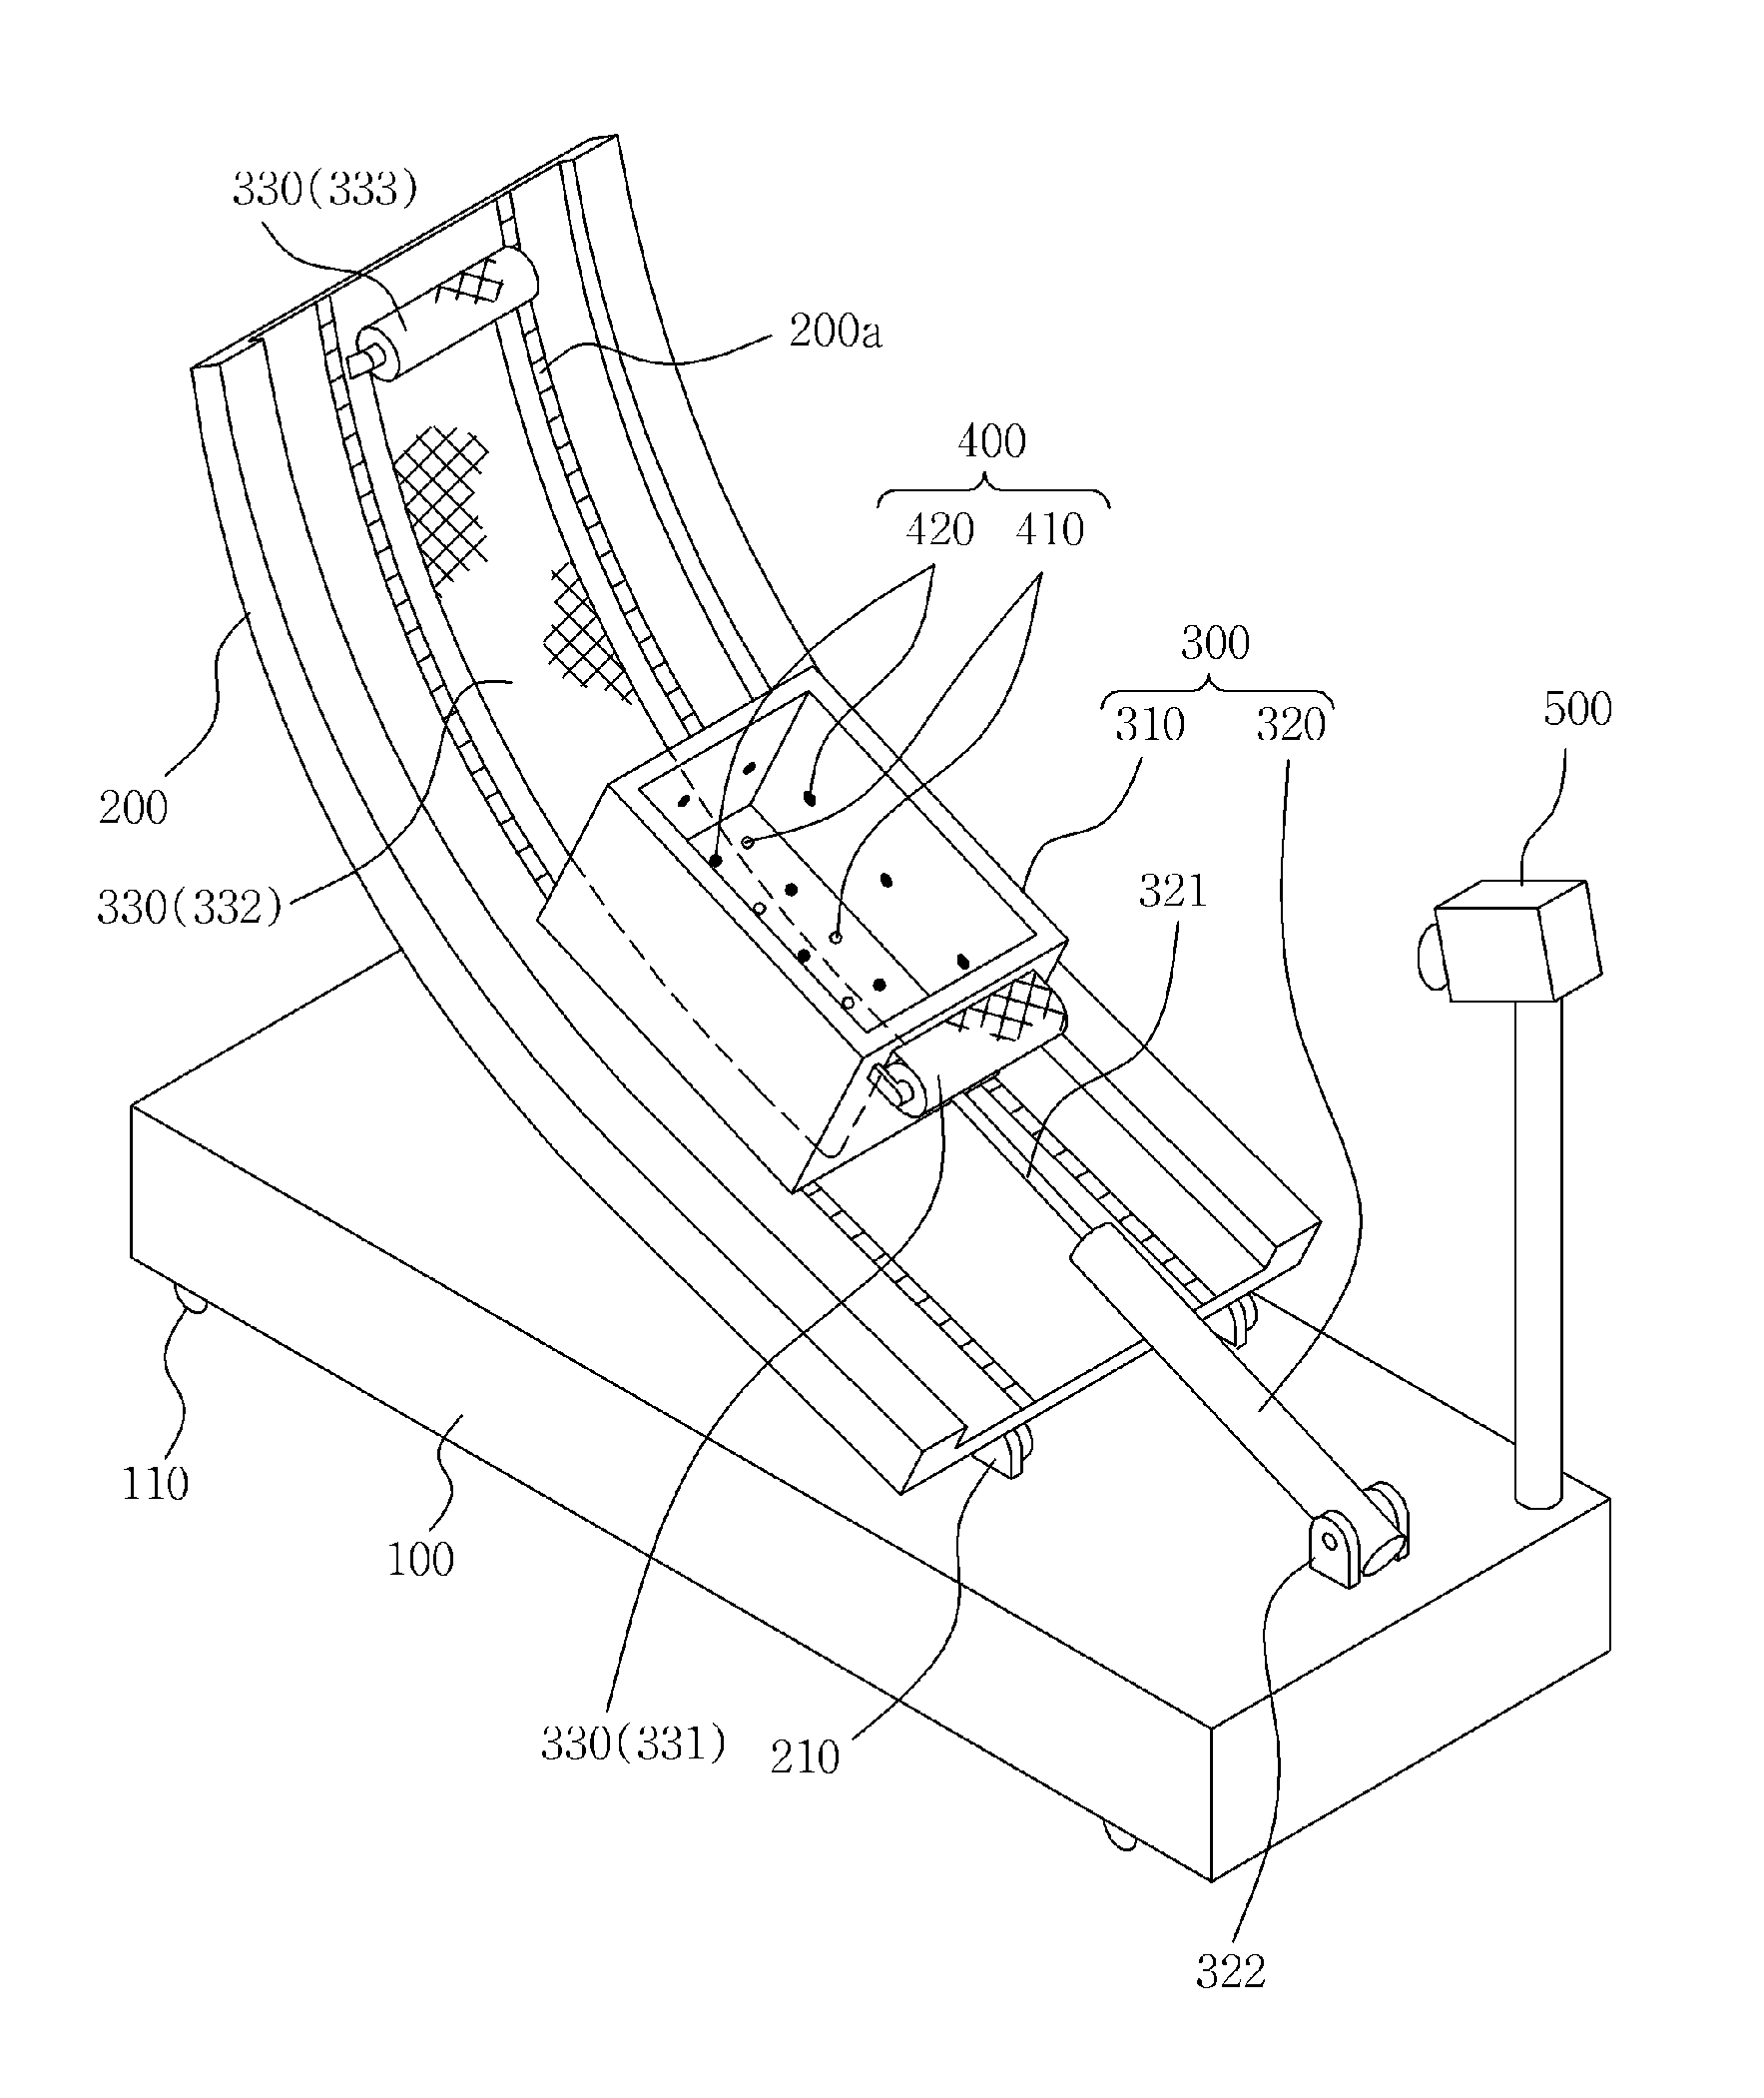 Test apparatus for early landslide detection fully-connected with pore water pressure, surface displacement and shear surface